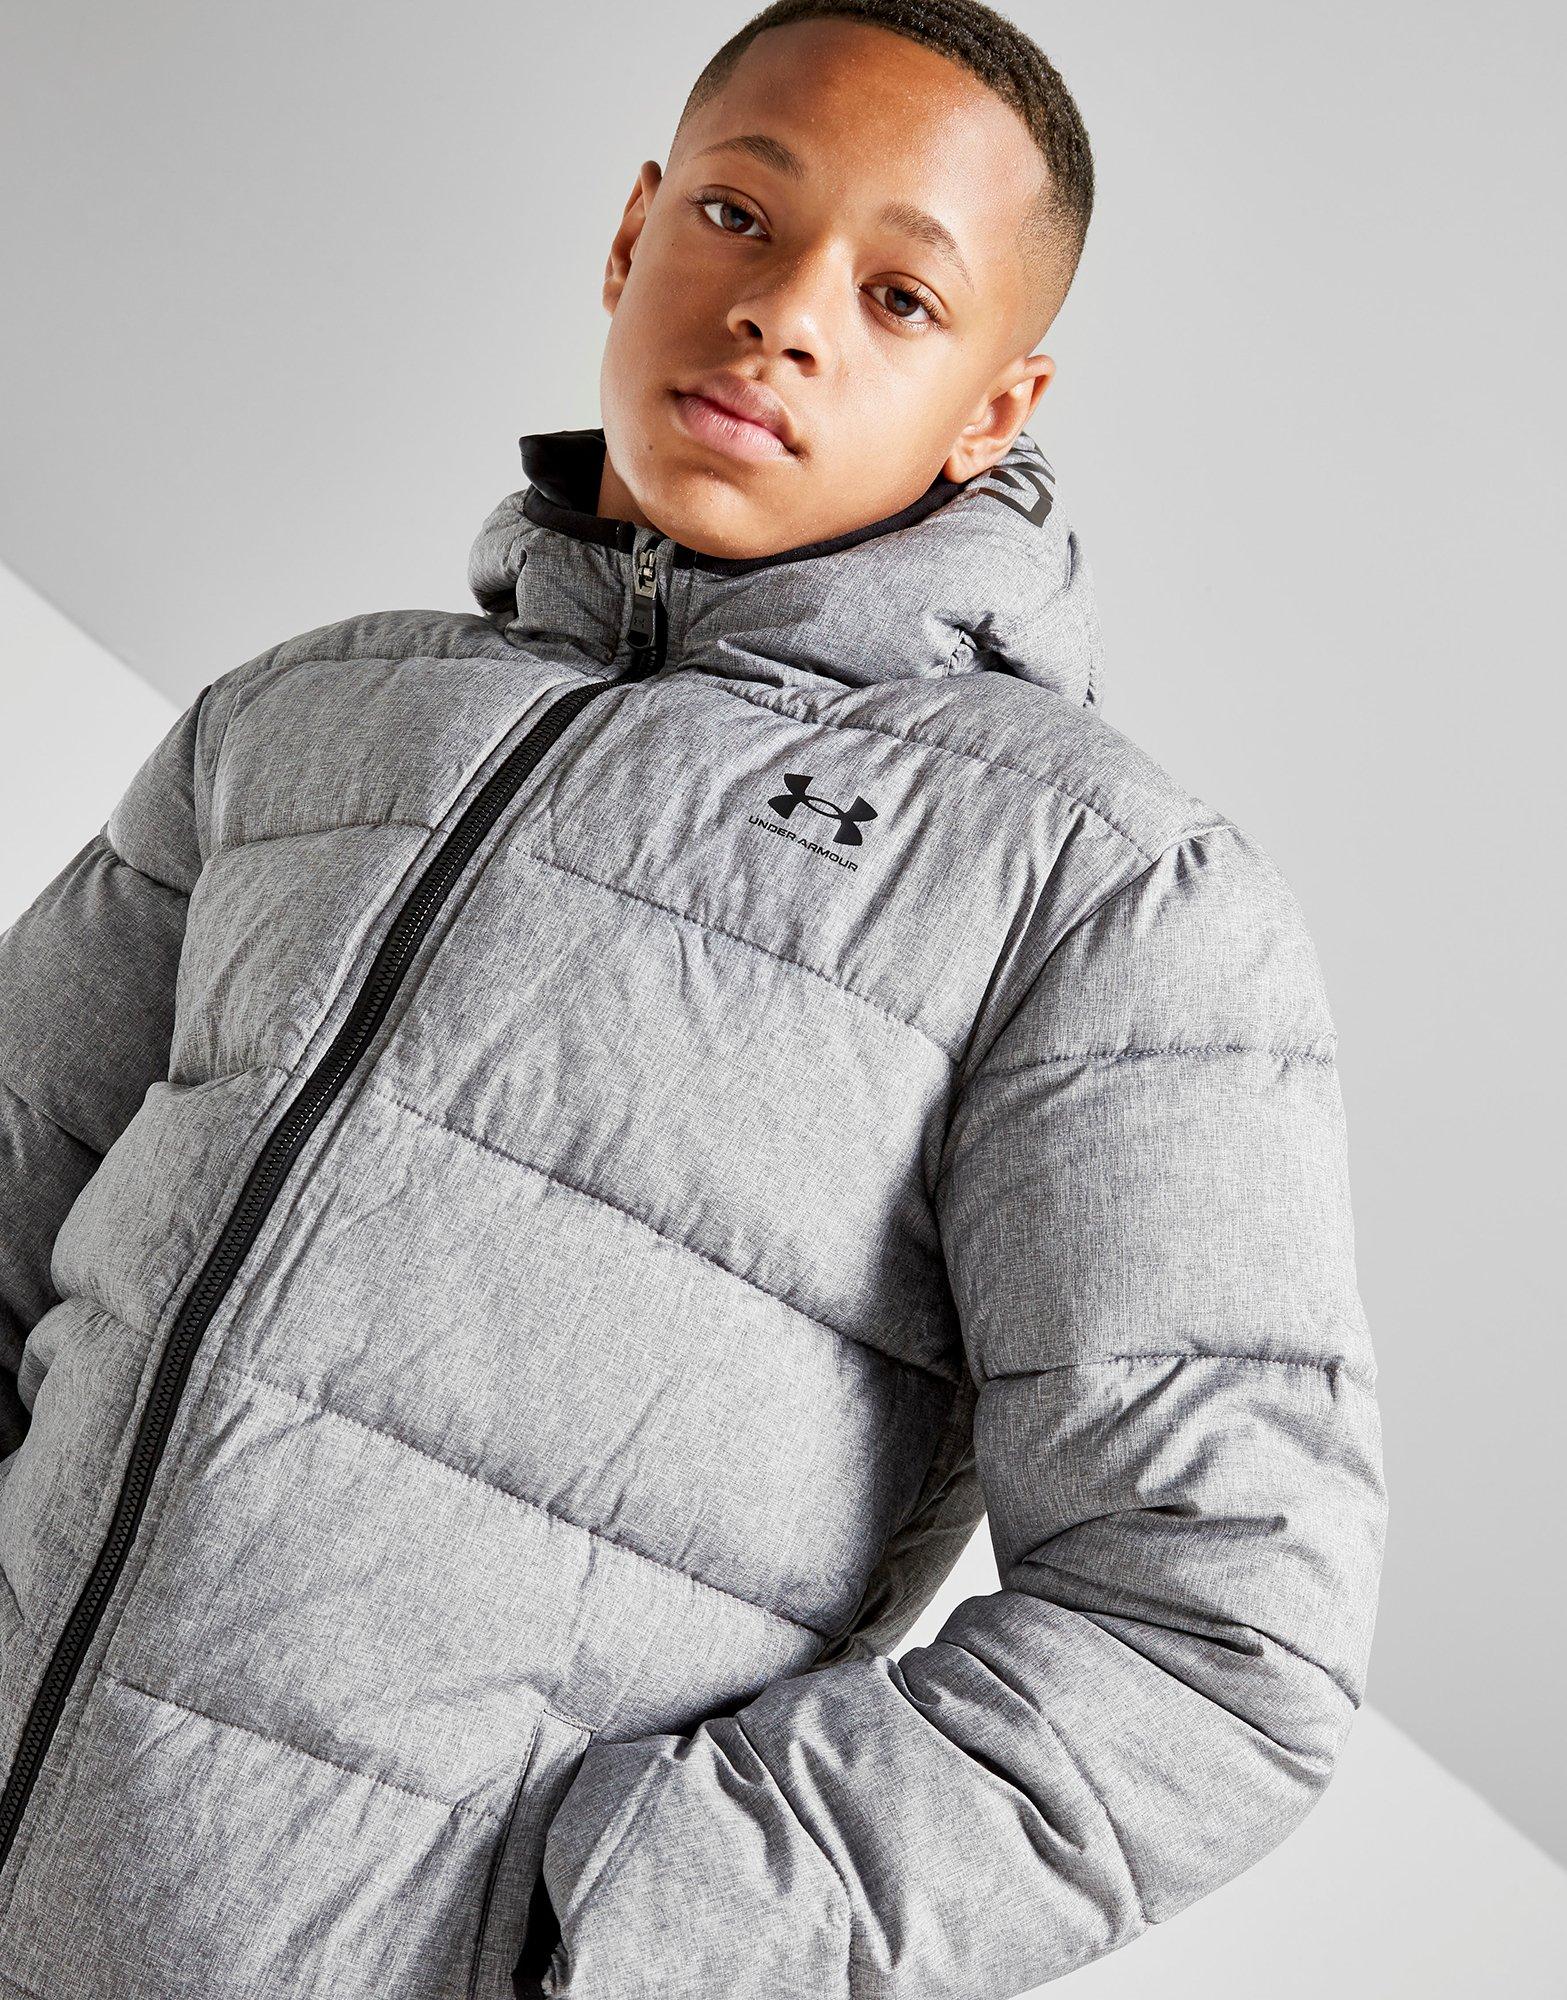 under armour padded coat